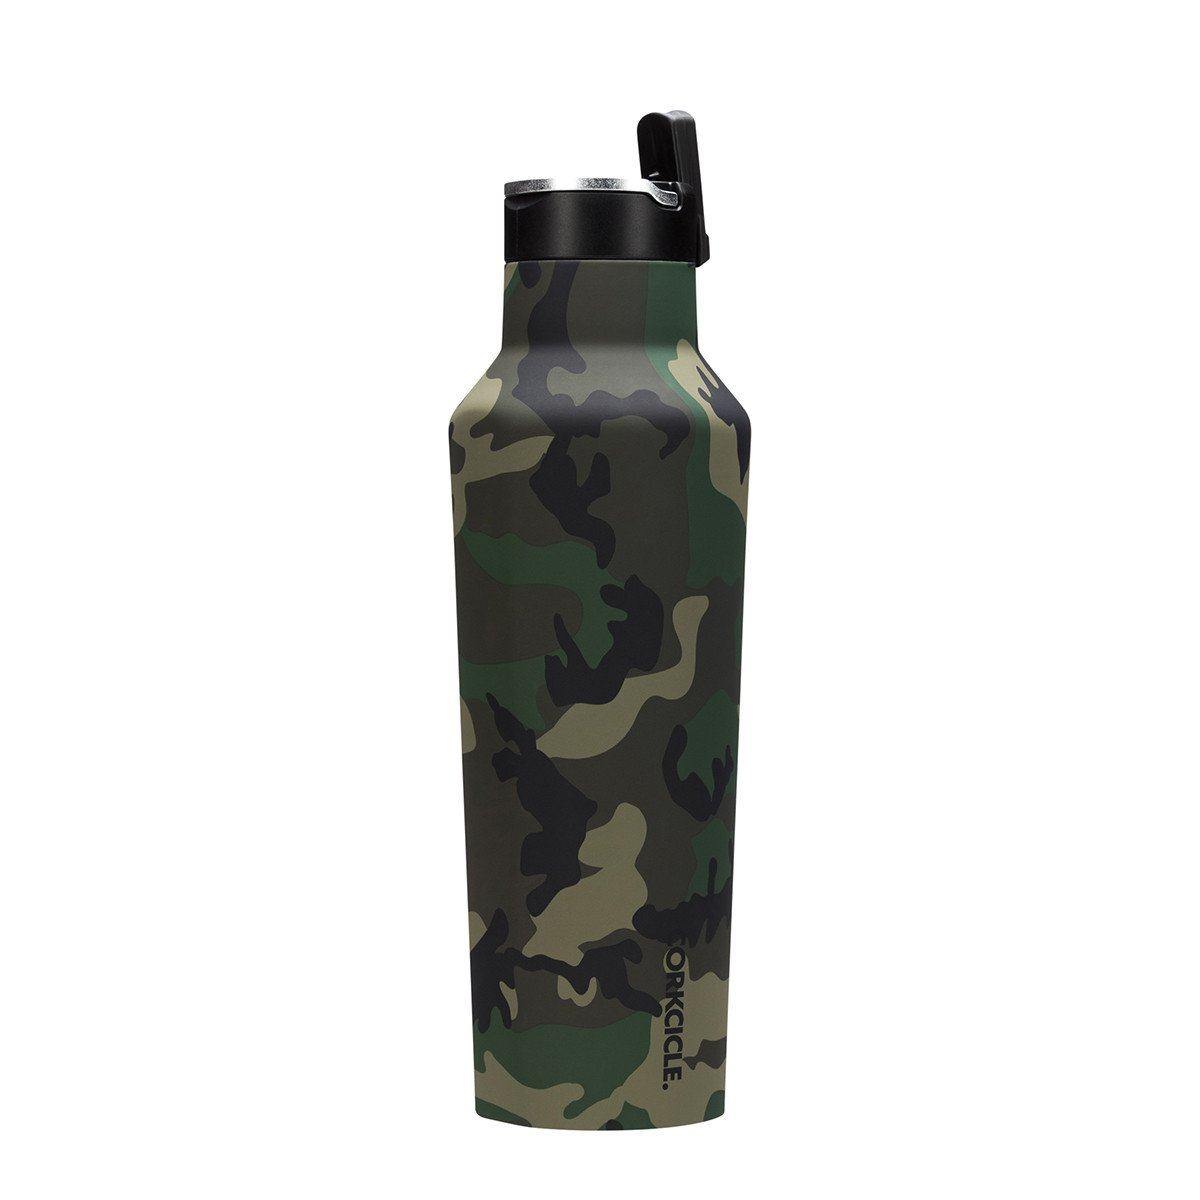 Corkcicle Woodland Camo Sports Canteen 600ml | Army Drink Bottle | corkcicle water bottle | corkcicle australia | corkcicle coffee mug | corkcicle canteen | water bottles | insulated water bottle | stainless steel water bottle | tumbler bottle | drink bottle | corkcicle mug | corkcicle cup | insulated bottle | corkcicle stemless | insulated water bottle with straw | water canteen | corkcicle sale